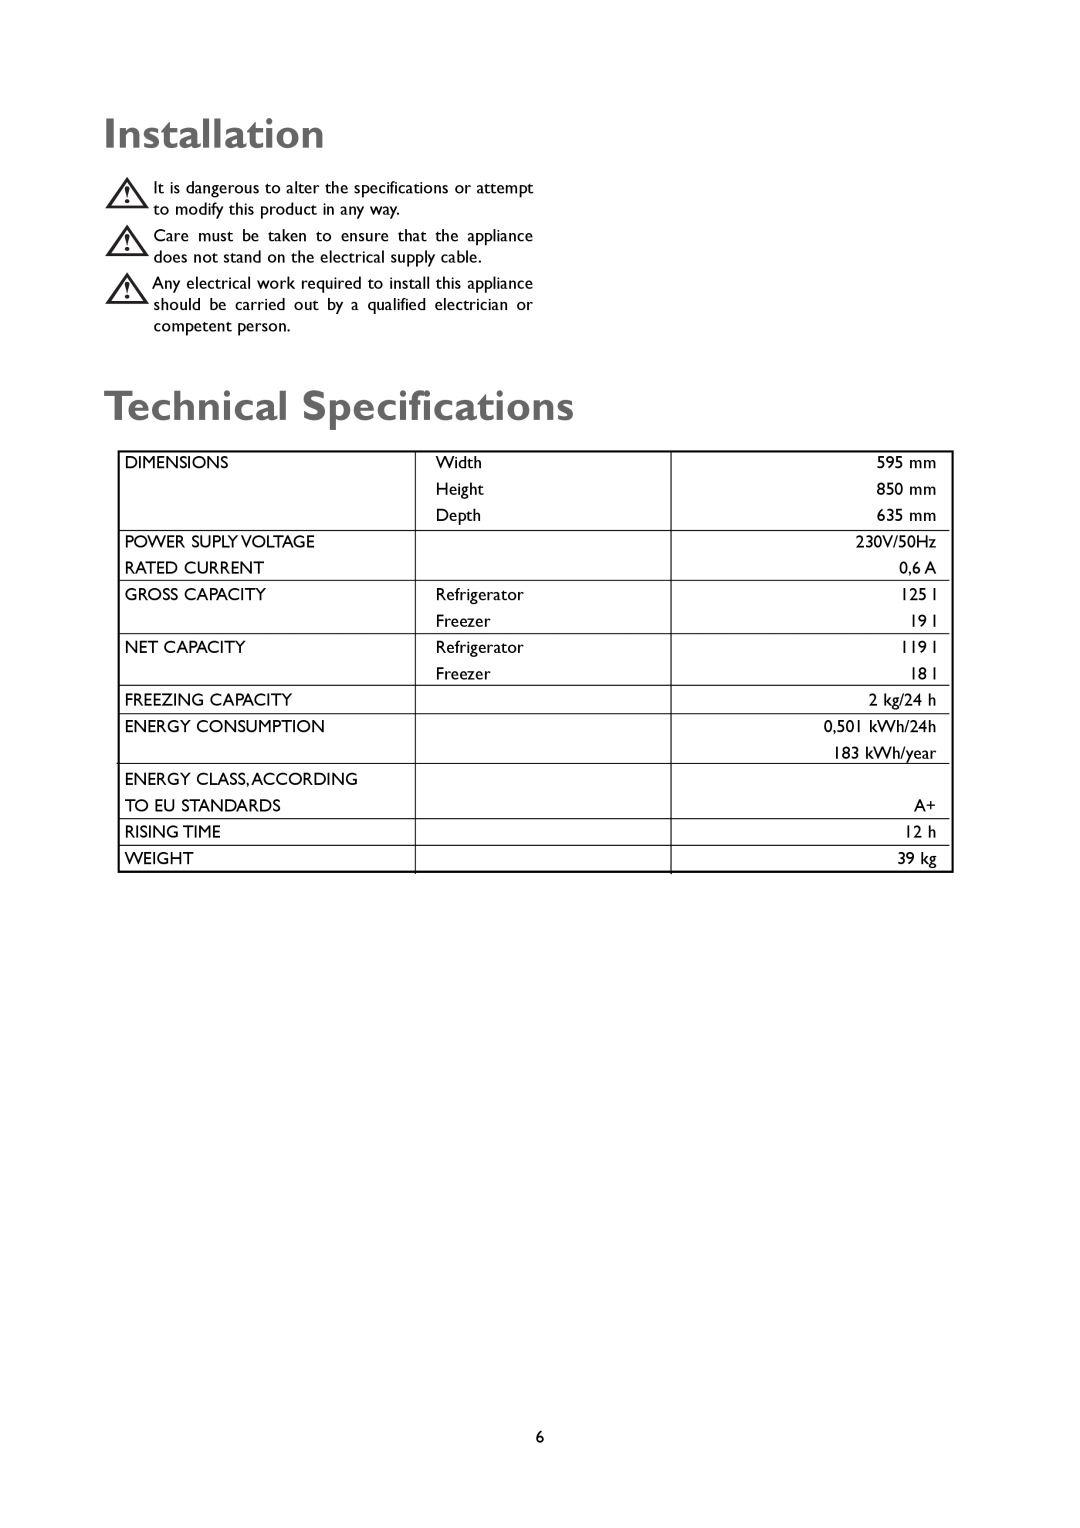 John Lewis JLUCFRW6001 instruction manual Installation, Technical Specifications 